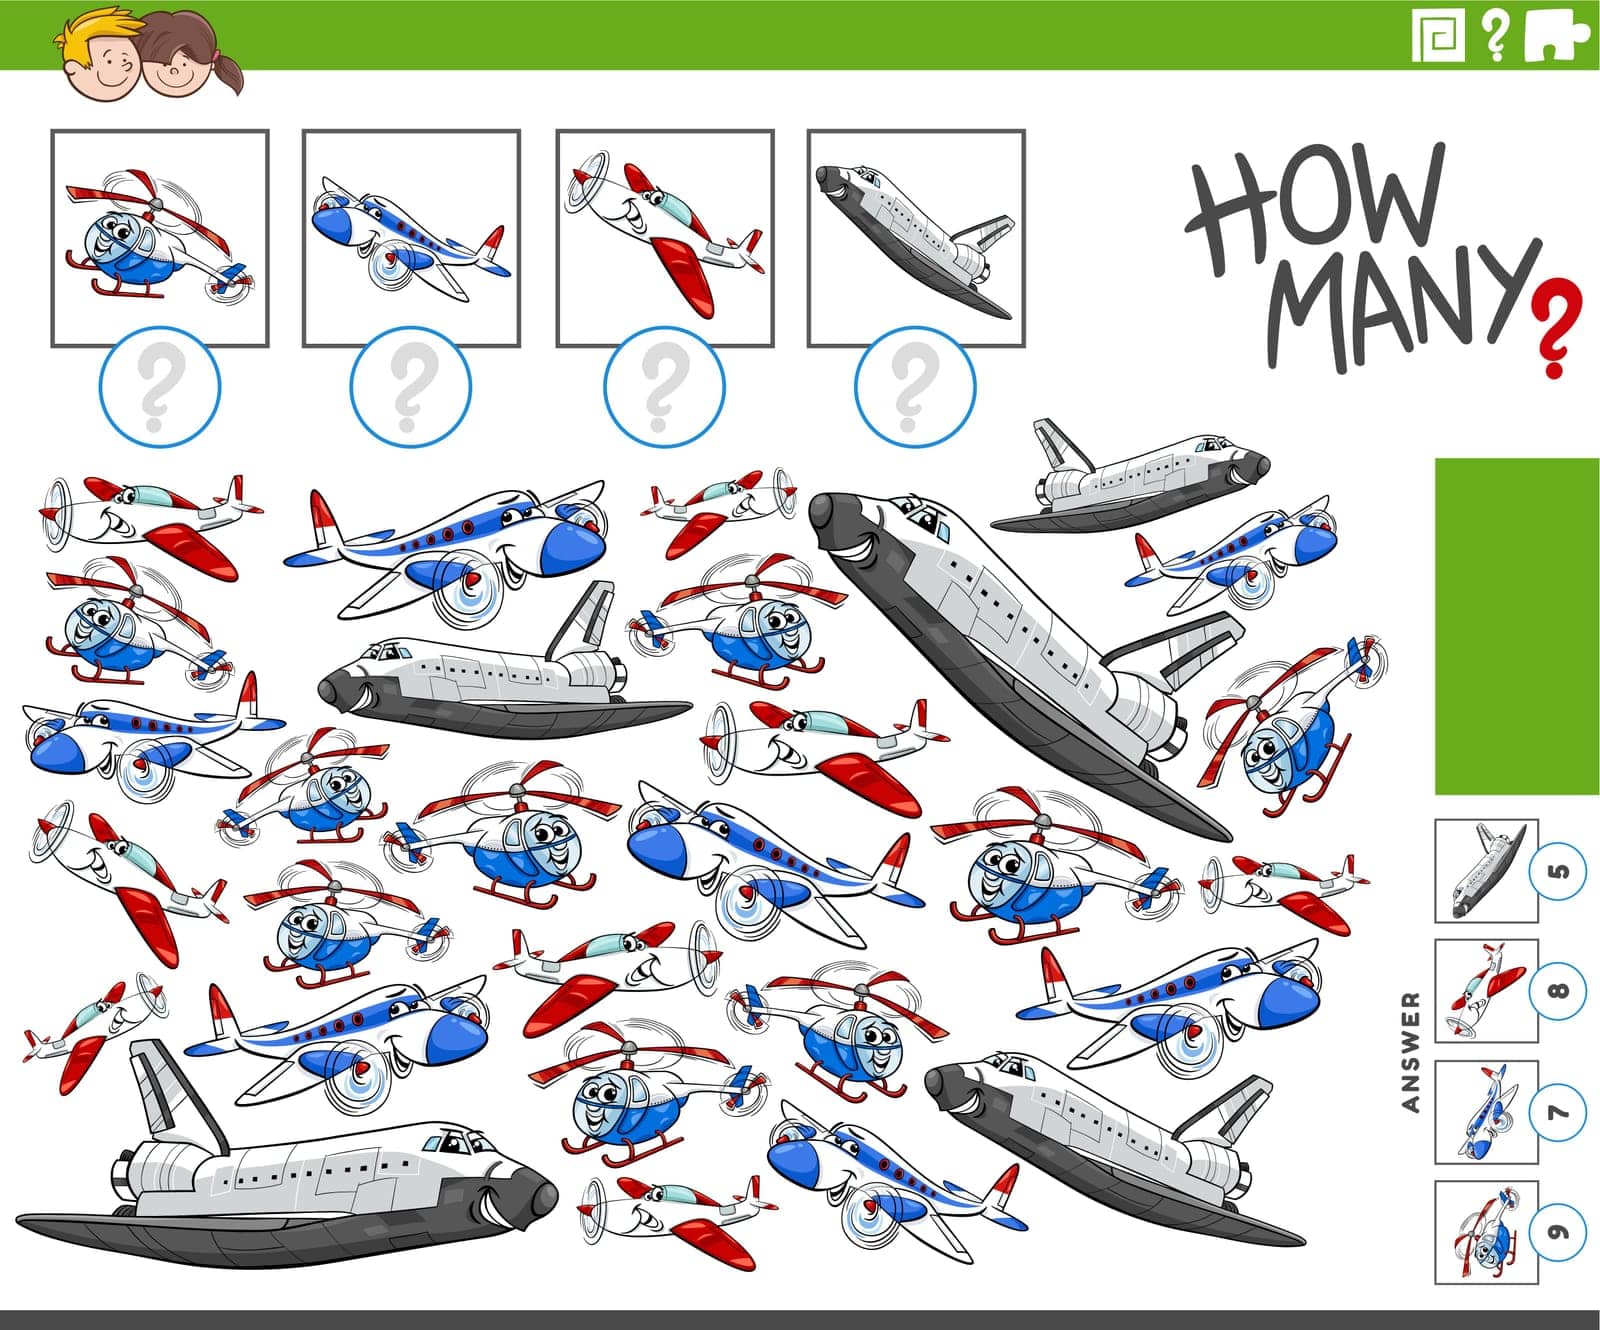 Illustration of educational counting game with cartoon planes and flying machines